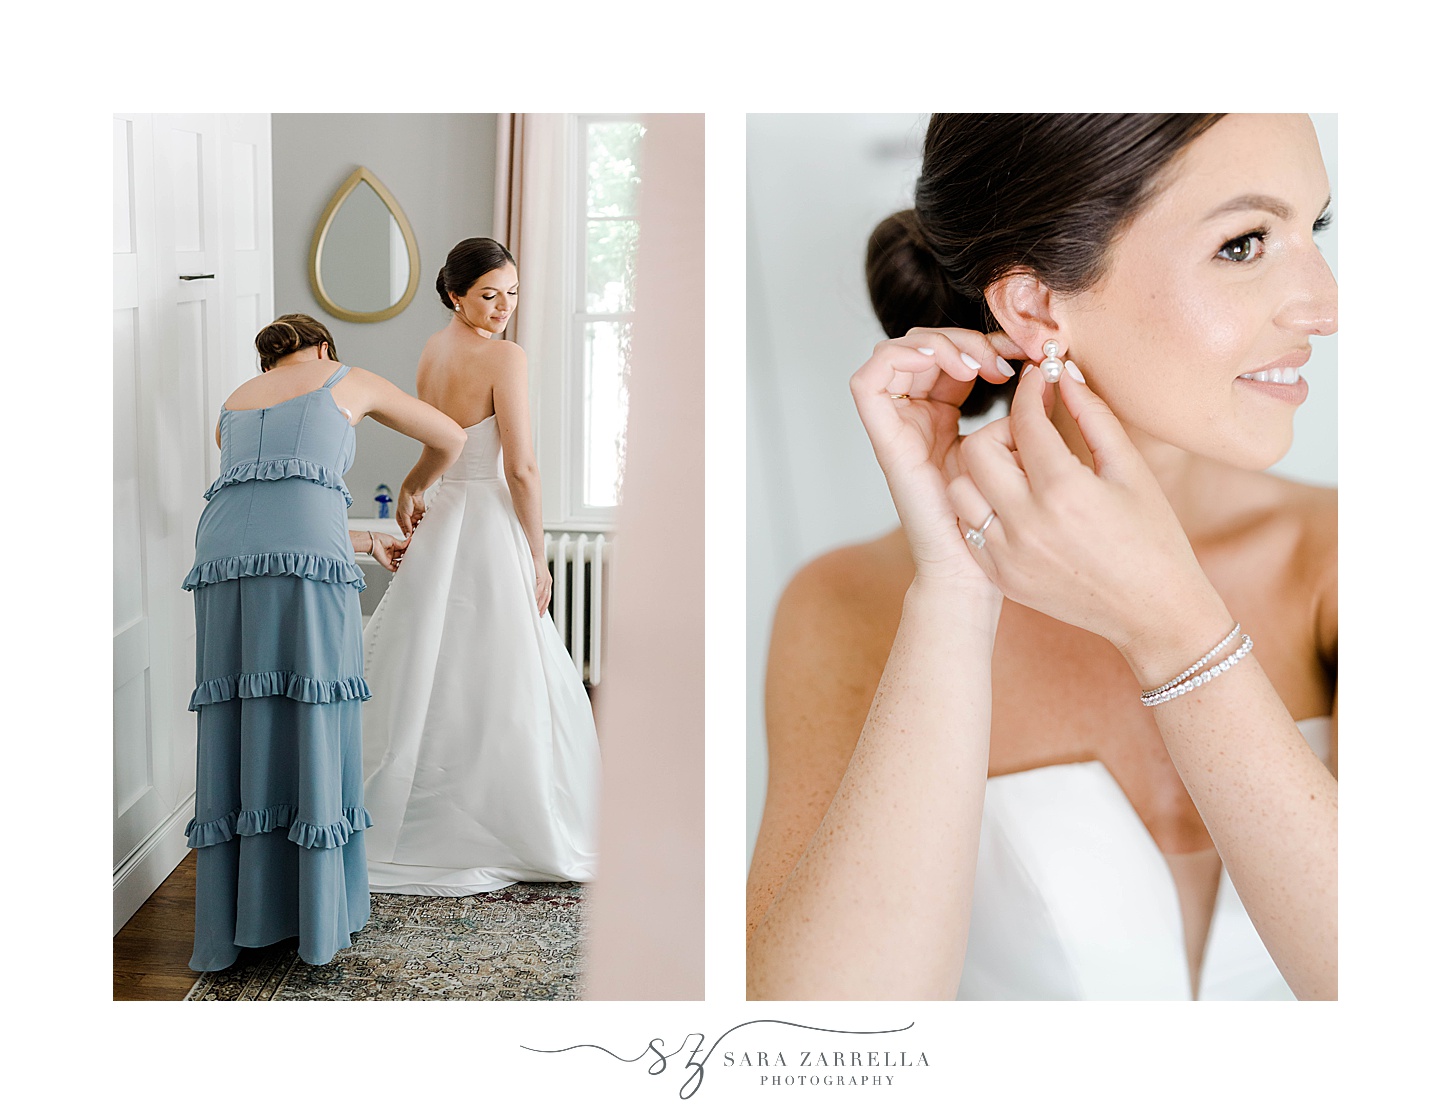 bridesmaid in blue dress helps bride into gown while she adjust earrings